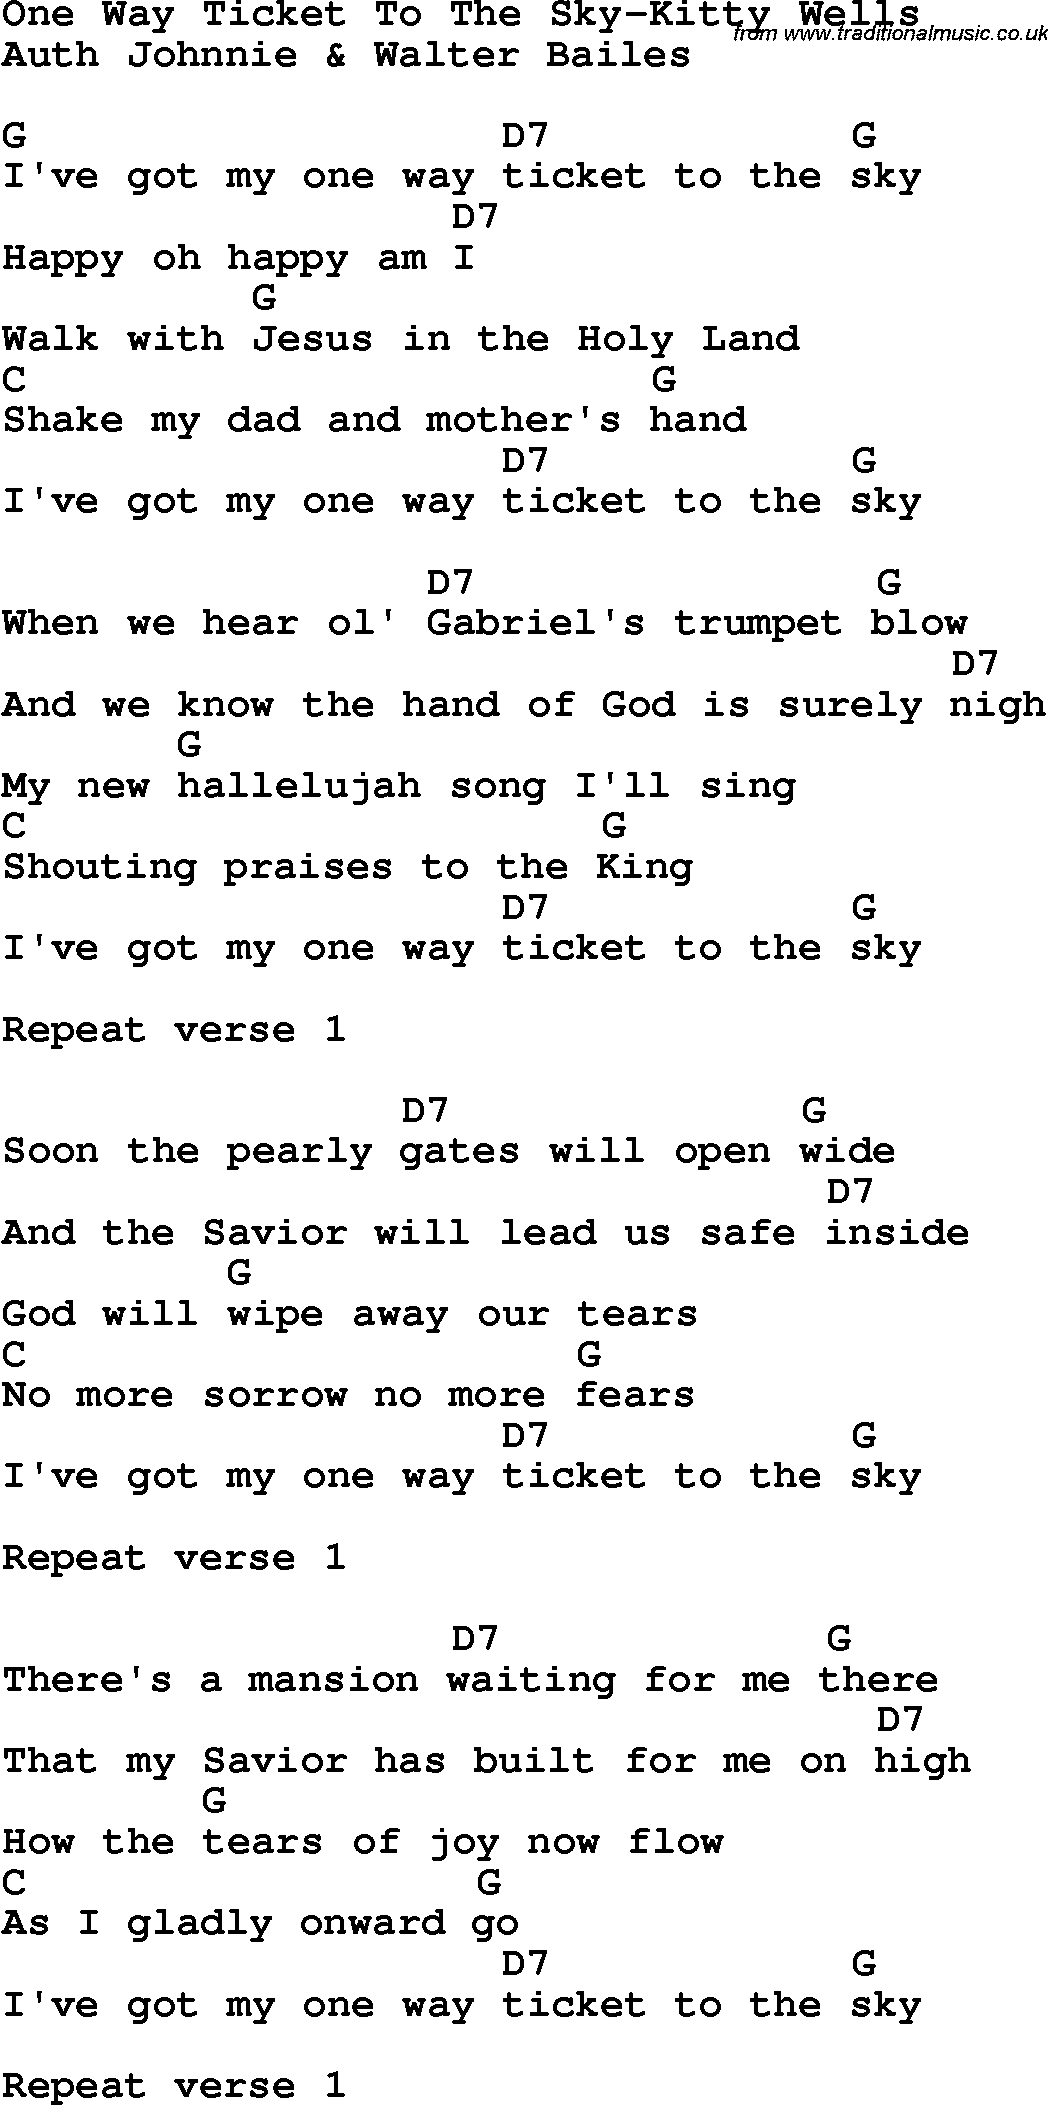 Country, Southern and Bluegrass Gospel Song One Way Ticket To The Sky-Kitty Wells lyrics and chords